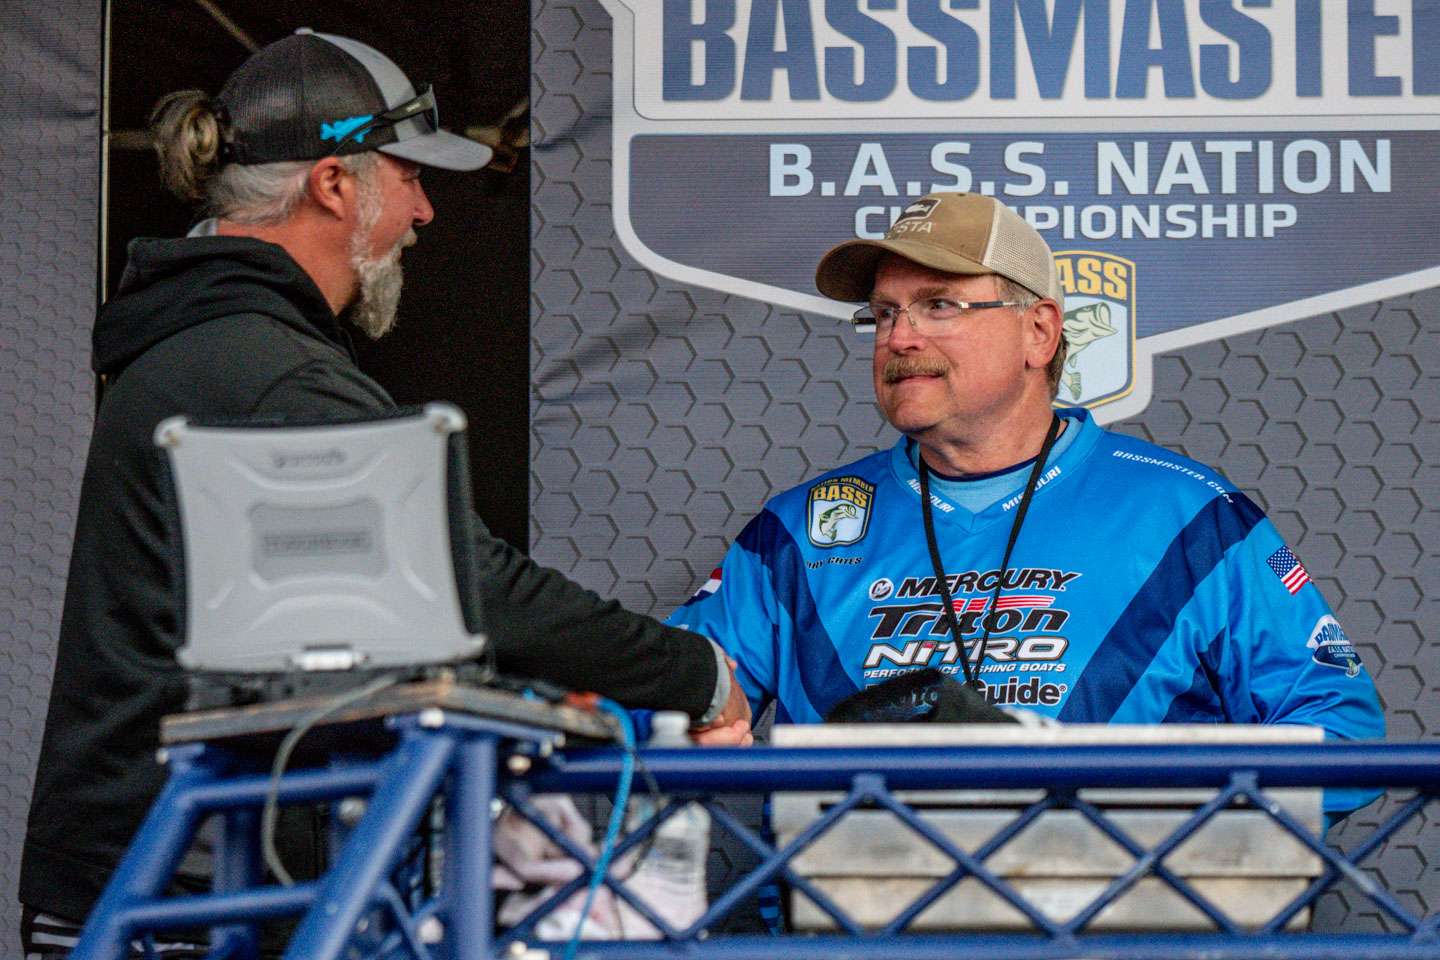 Ray Cates takes home the co-angler champion title!